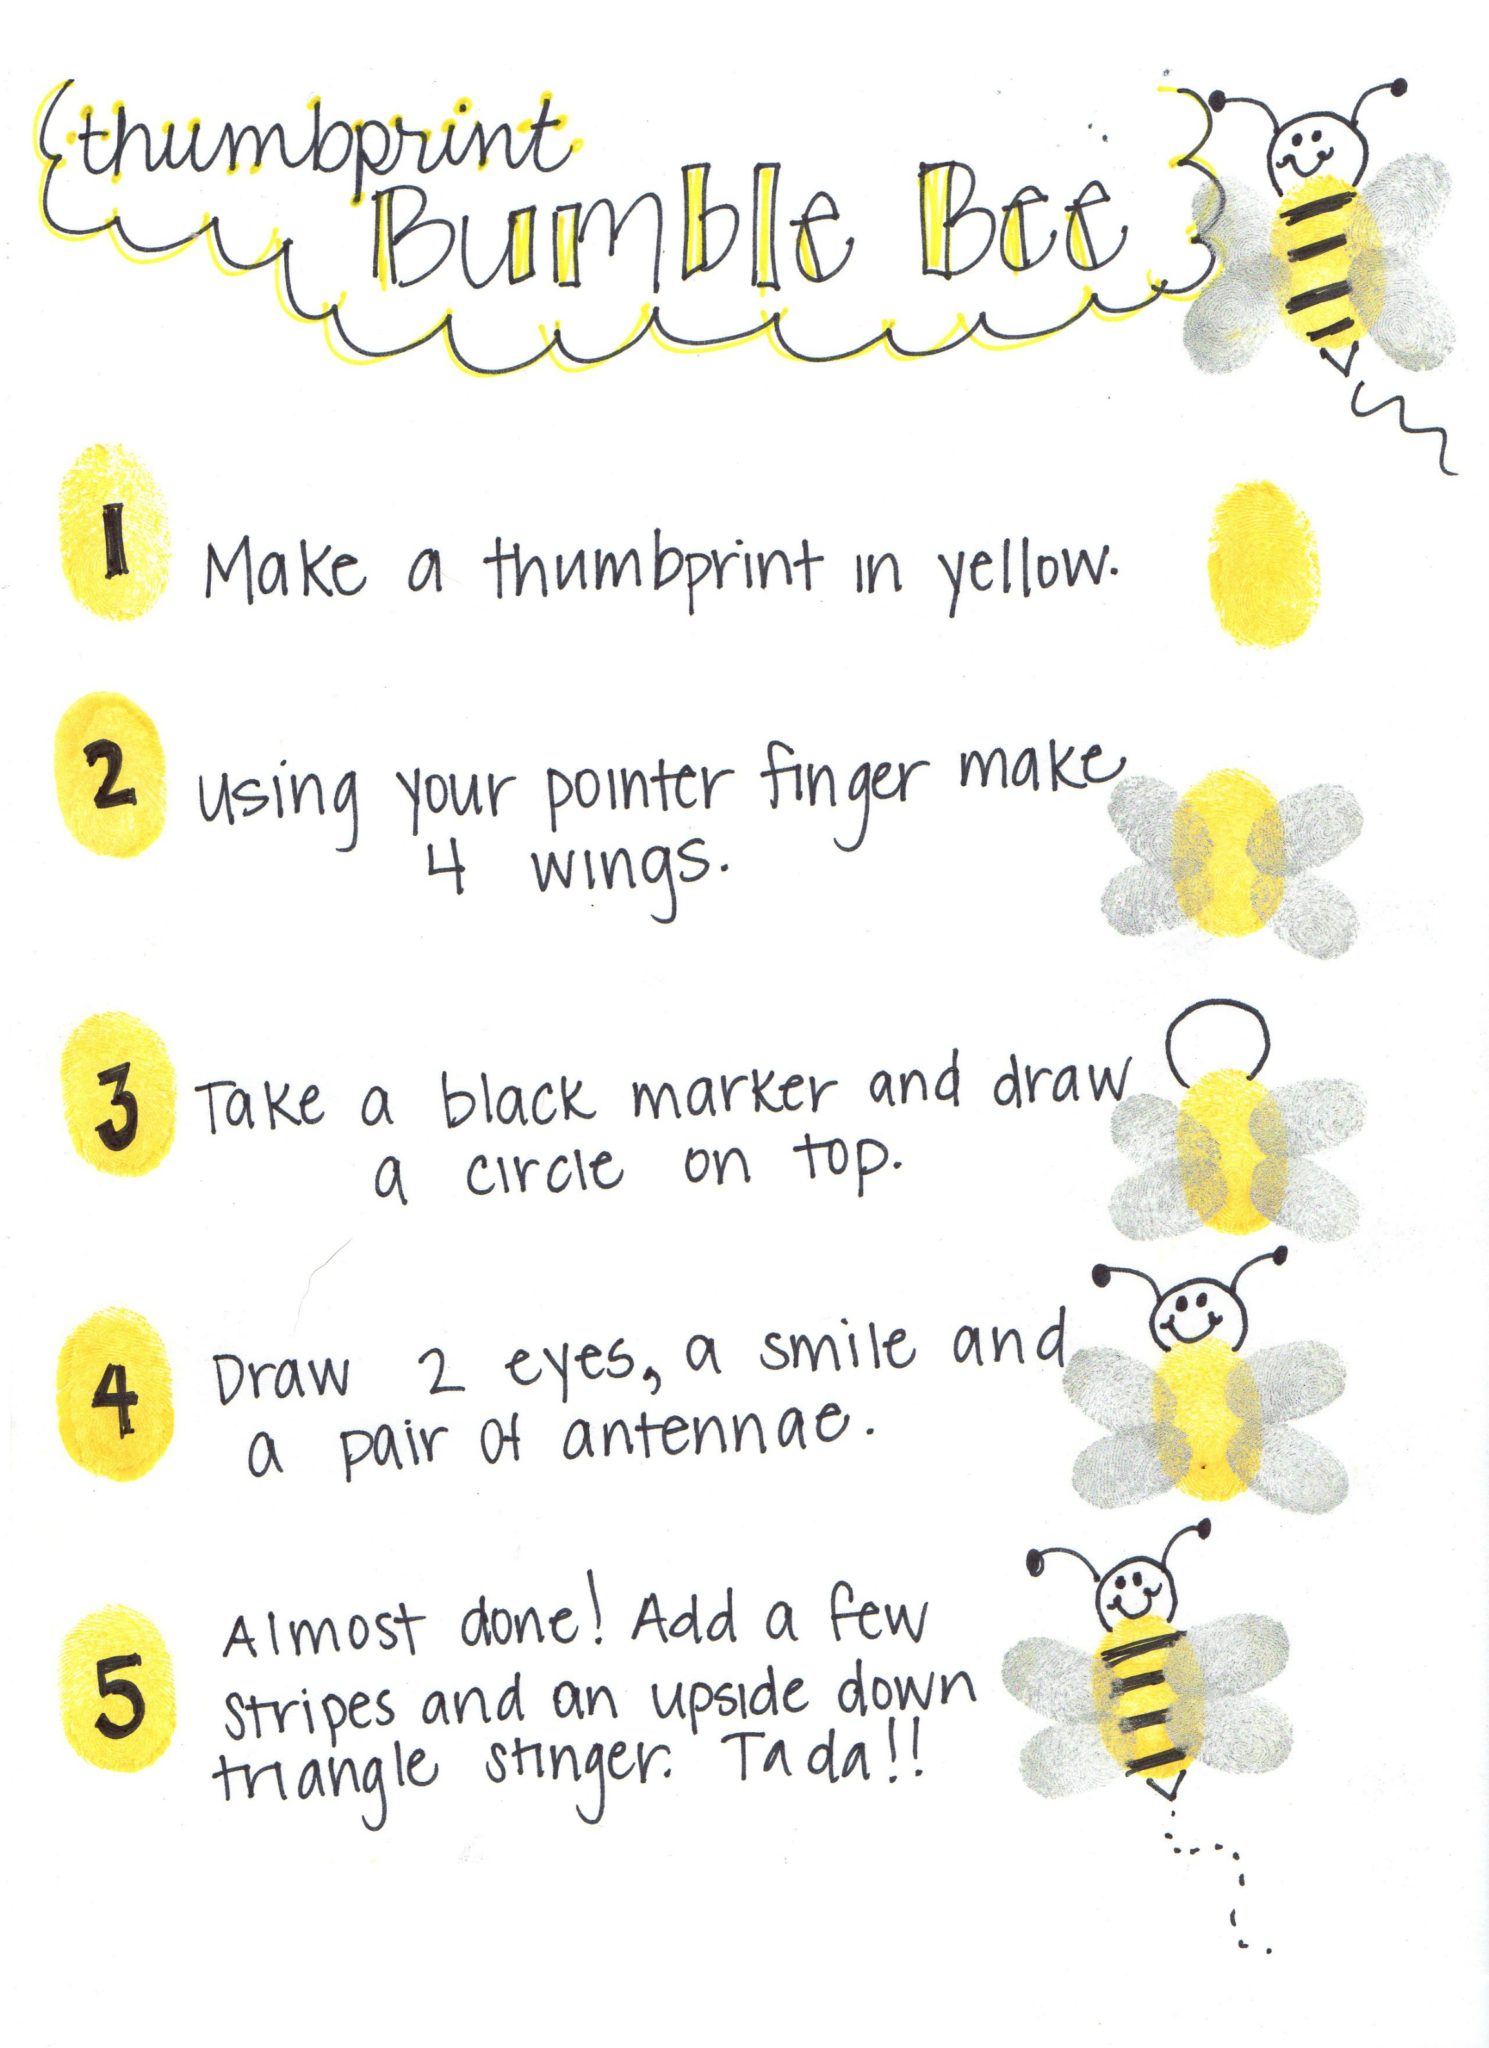 how to draw a thumbprint bee graphic